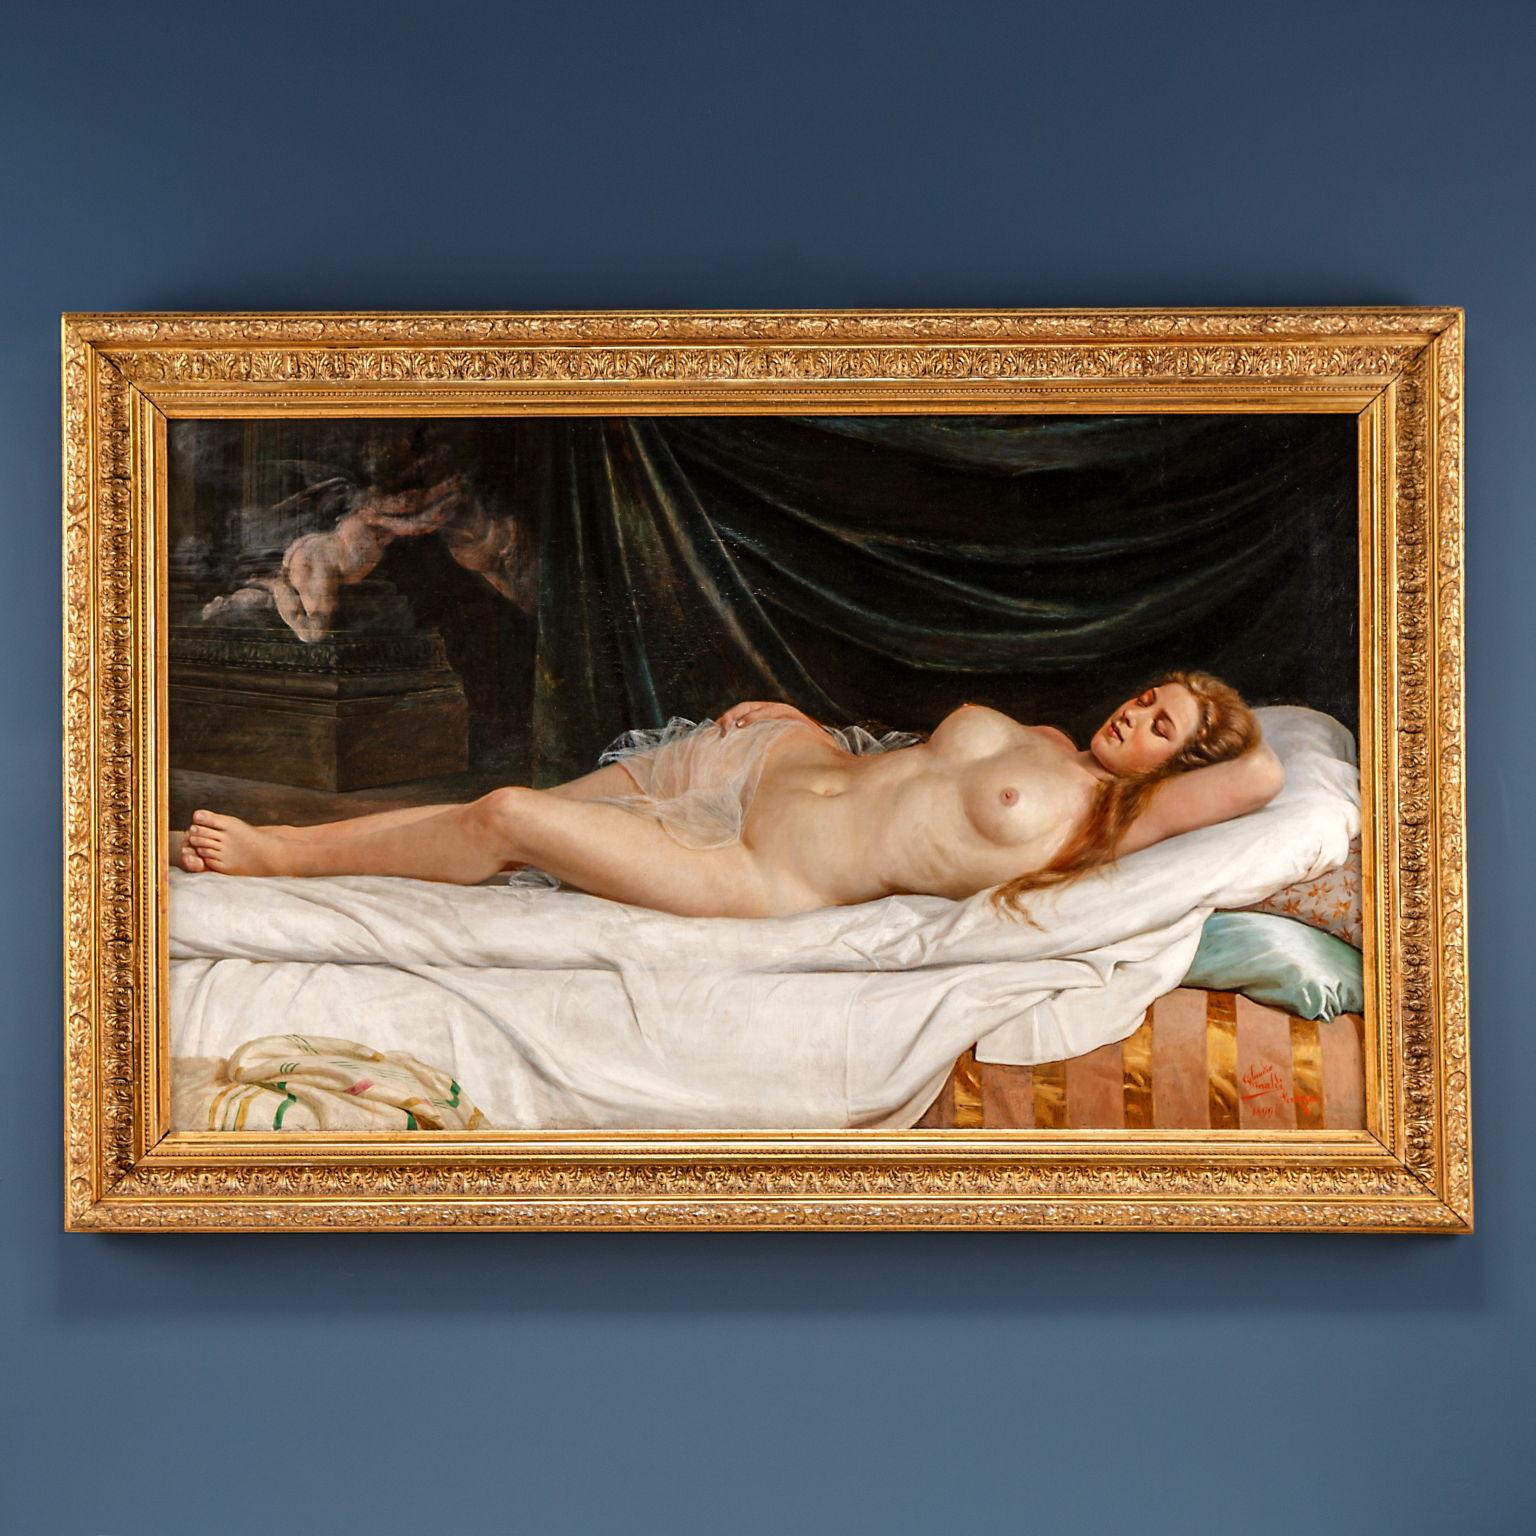 The scene is entirely occupied by a completely naked female figure, with the exception of a thin veil, with a diaphanous complexion and loose red hair that falls next to her breasts. She is fast asleep, lying on her back on a sprawling bed, whose